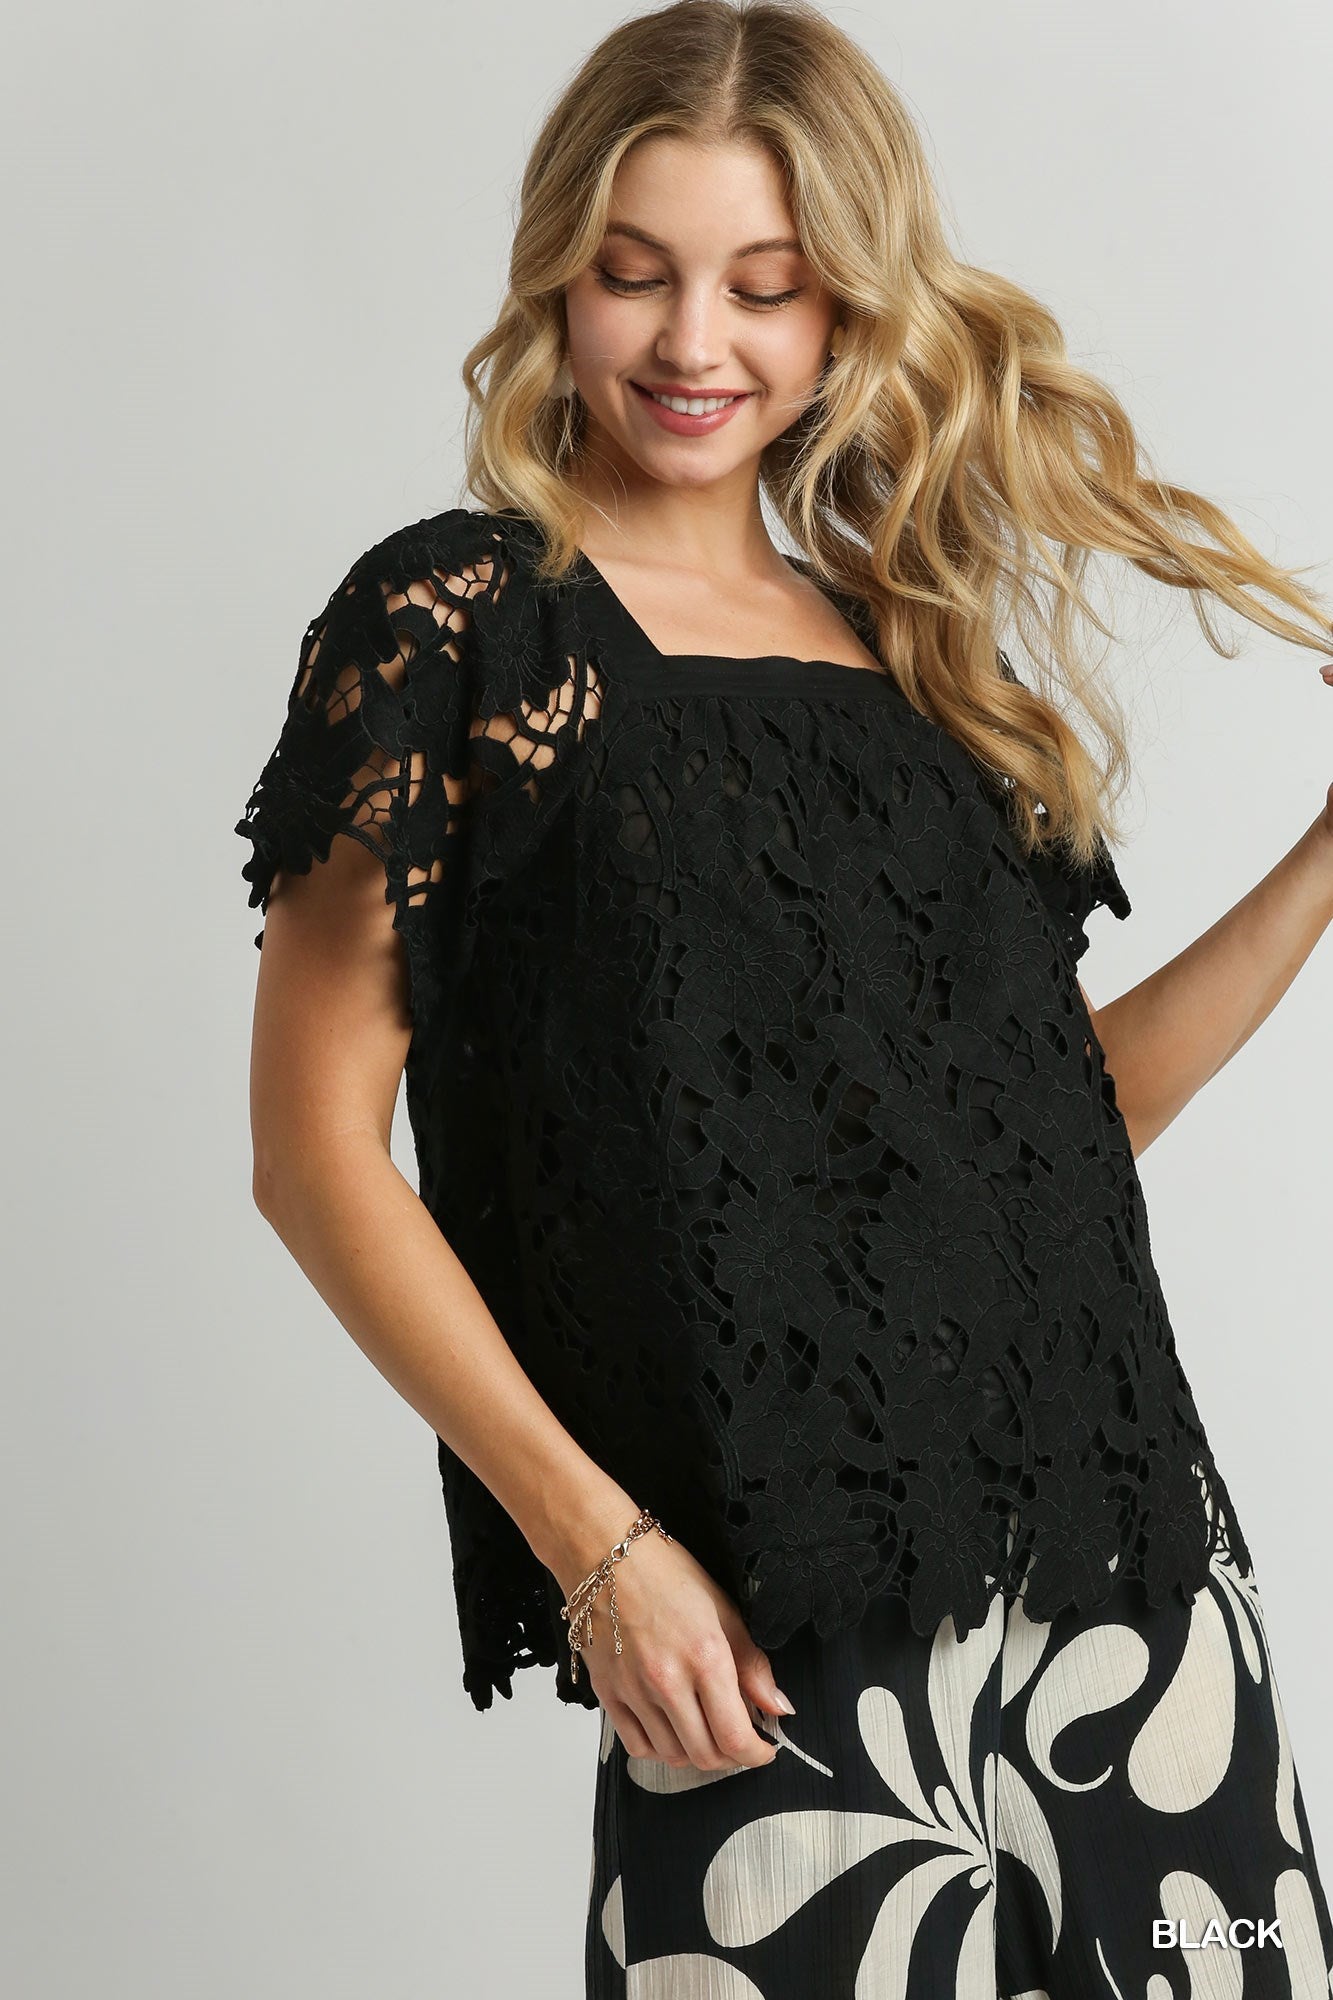 Floral Lace Square Neckline Short Sleeve Boxy Cut Top